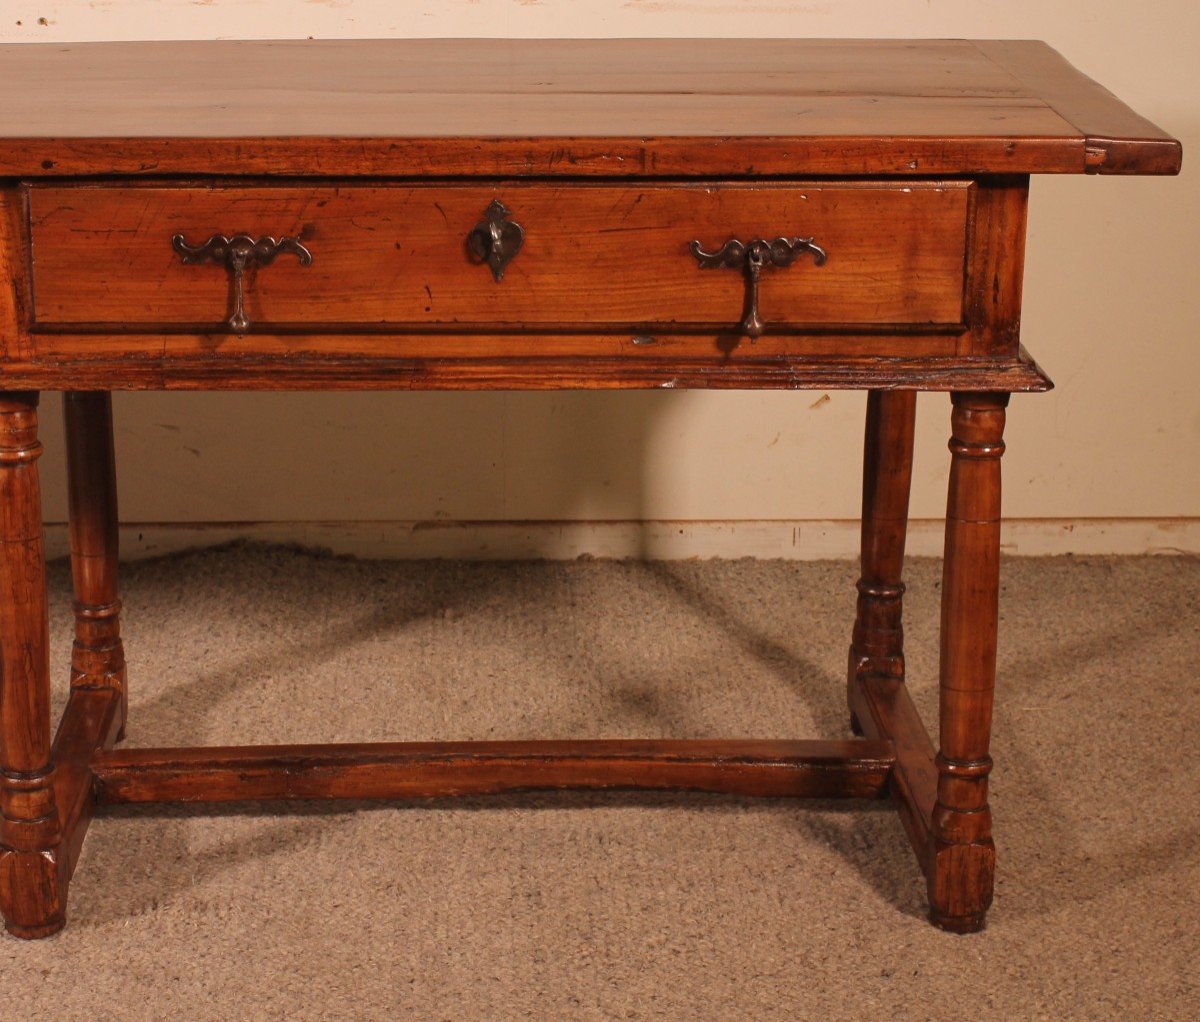 Large Spanish Console With 6 Feet -17° Century In Cherry Wood-photo-1